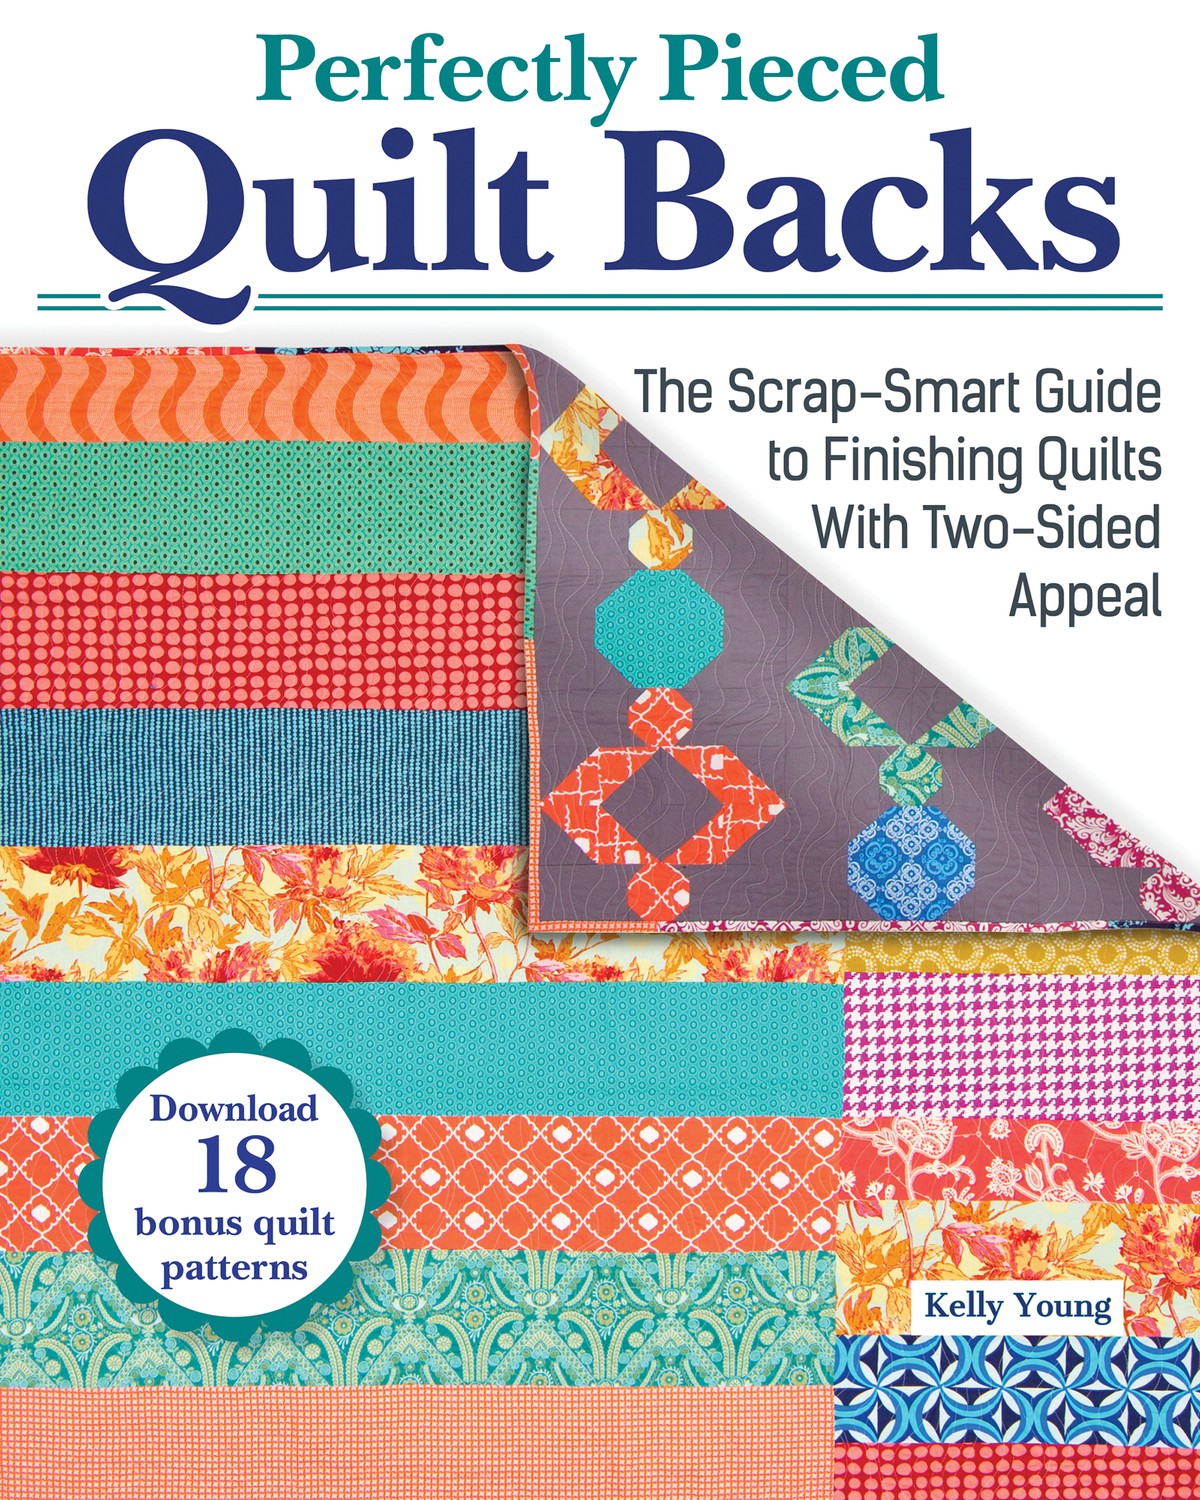 Your Guide to Quilt Batting from Connecting Threads